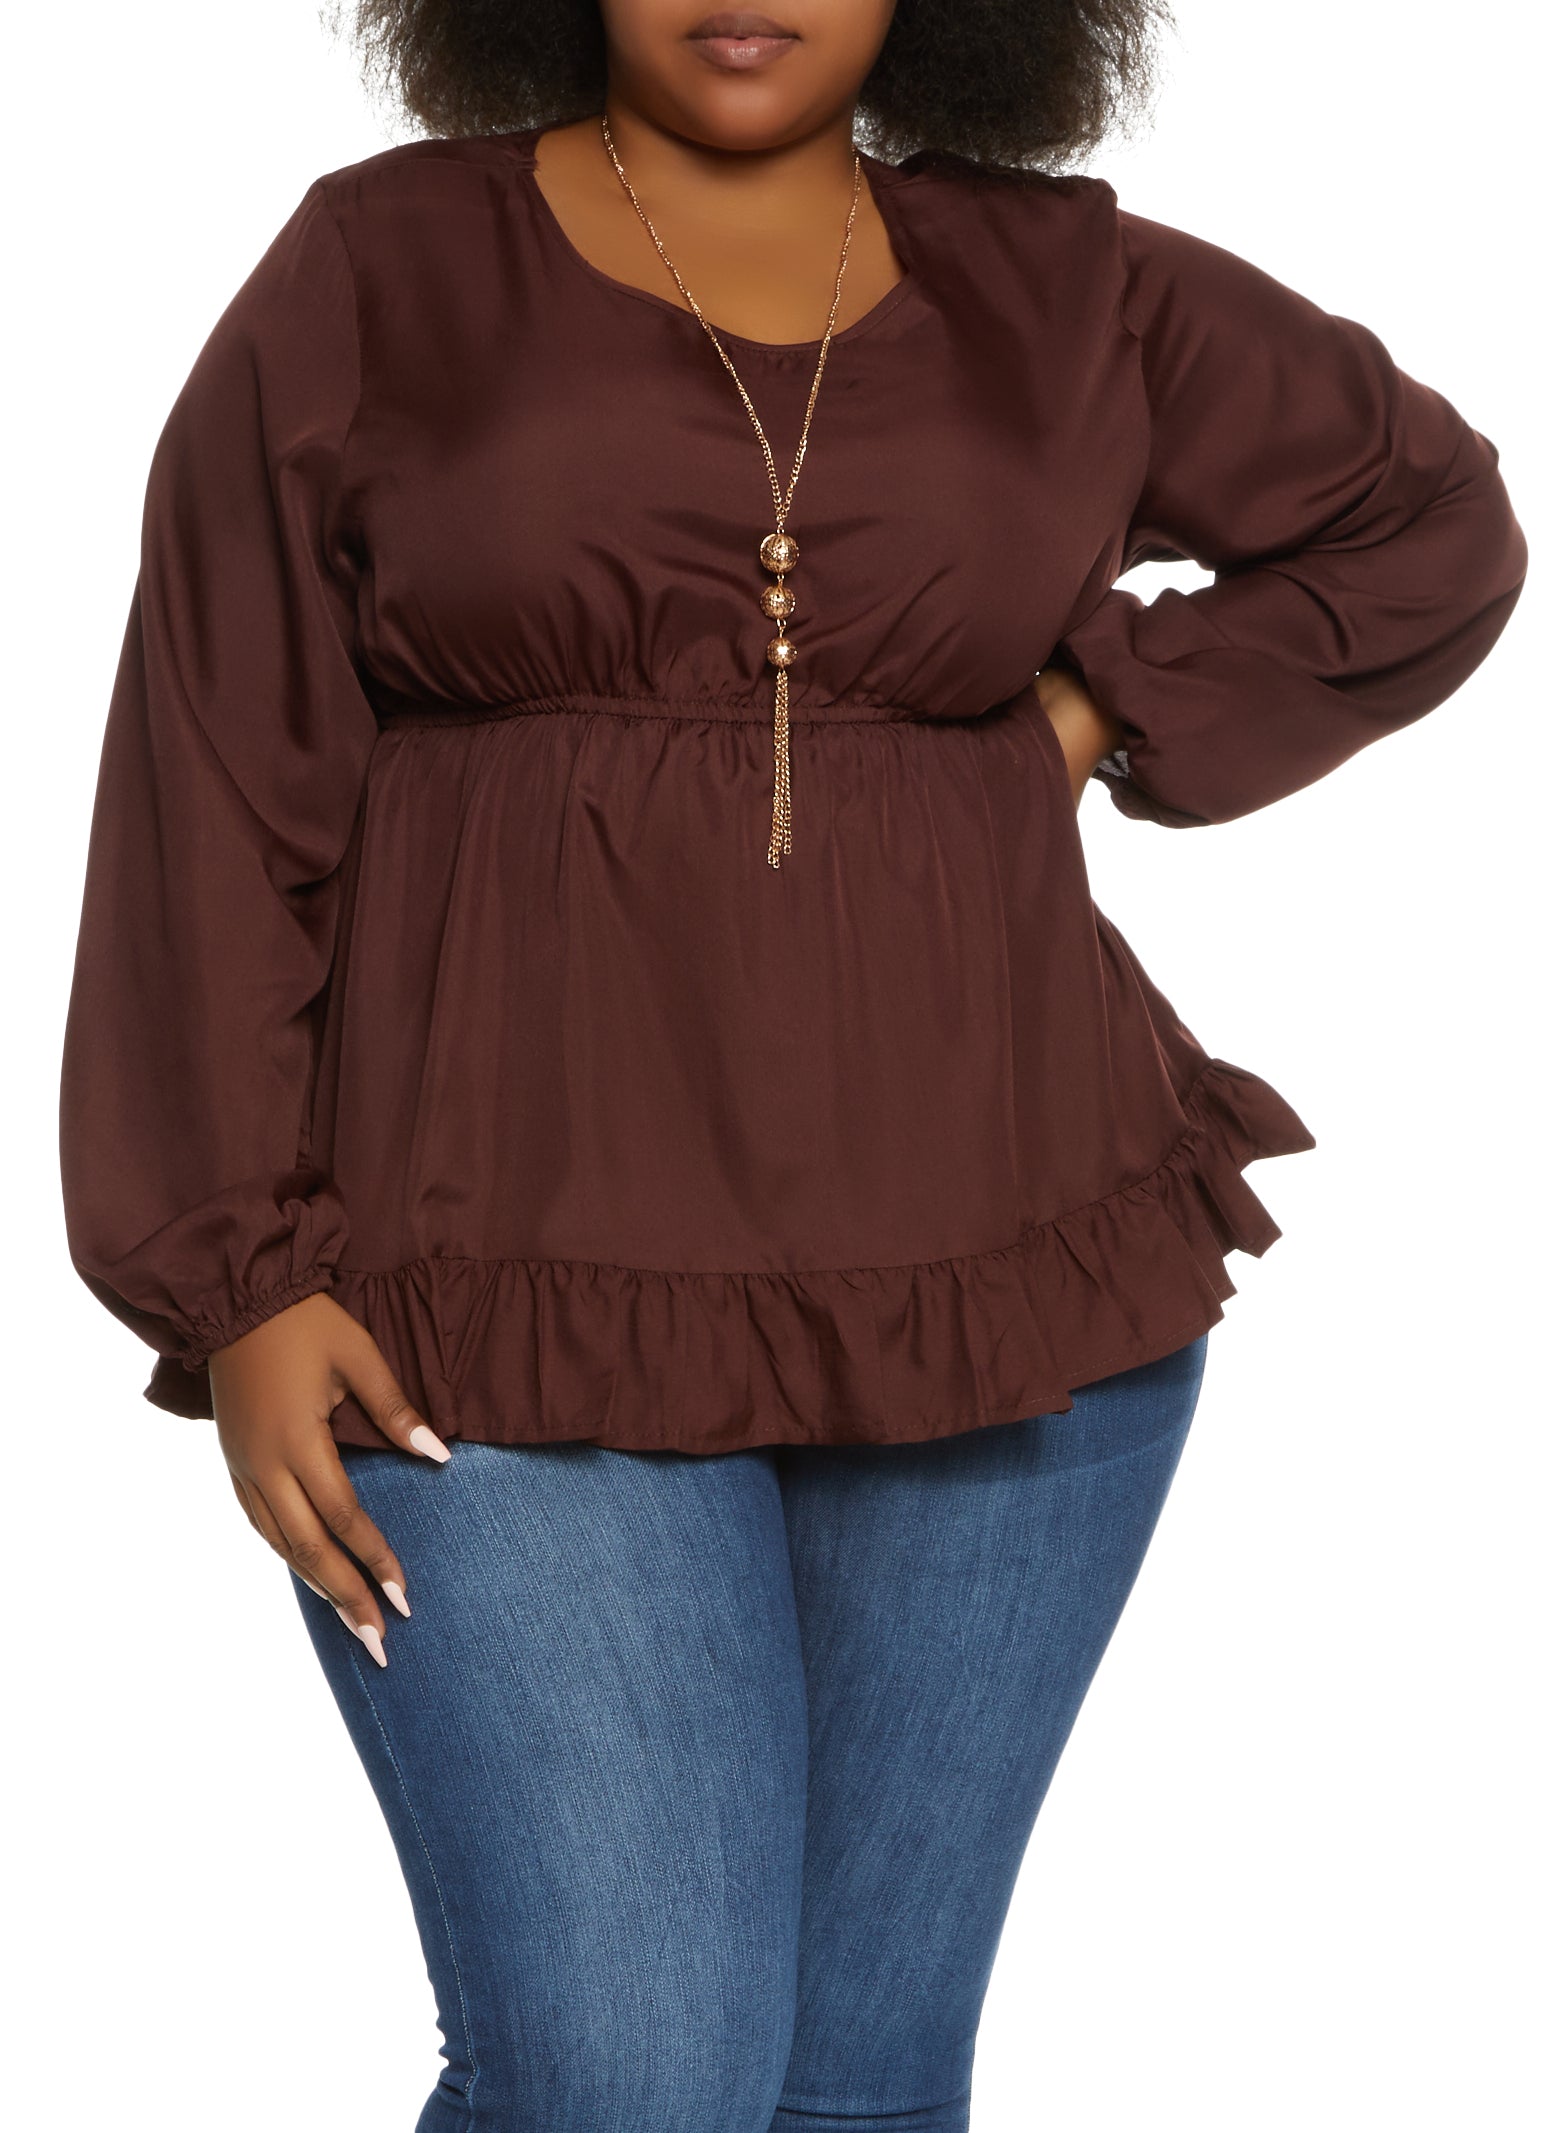 Plus Size Ruffle Trim Peplum Blouse with Necklace